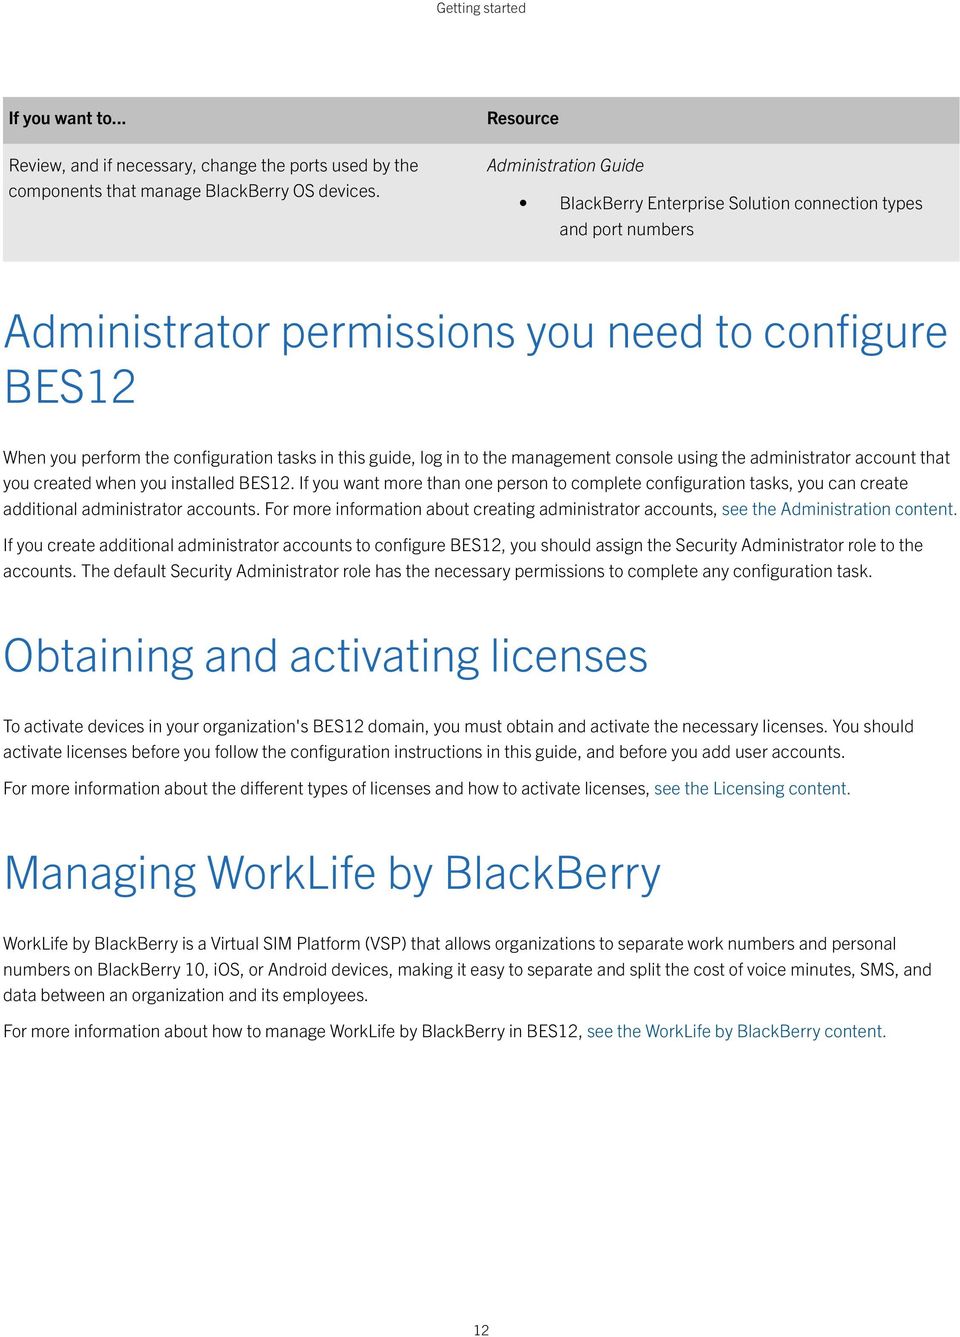 guide, log in to the management console using the administrator account that you created when you installed BES12.